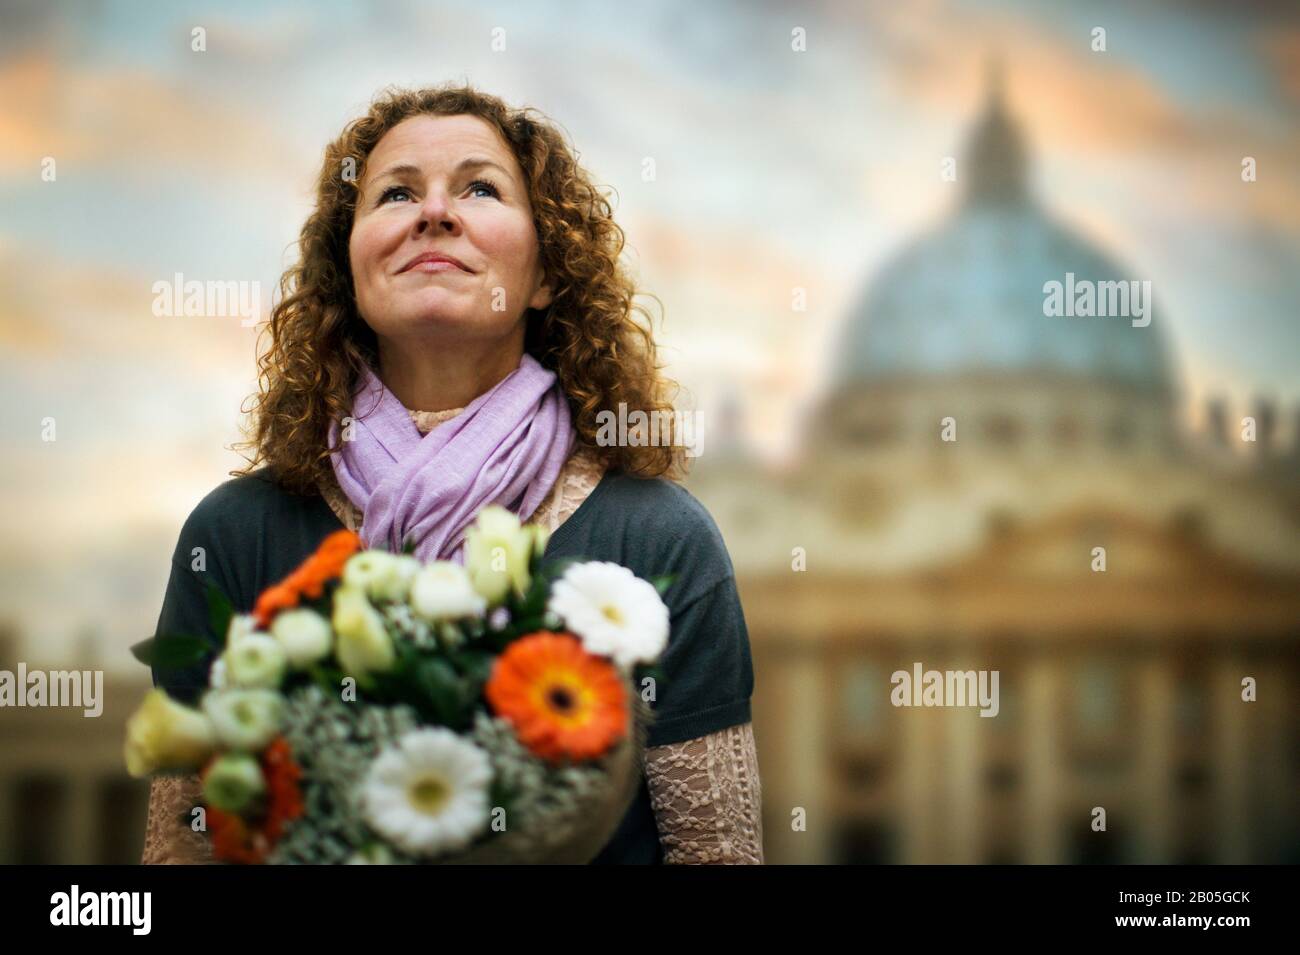 Smiling middle-aged woman holds a bouquet of flowers as she waits for someone outside the Sistine Chapel at sunset. Stock Photo